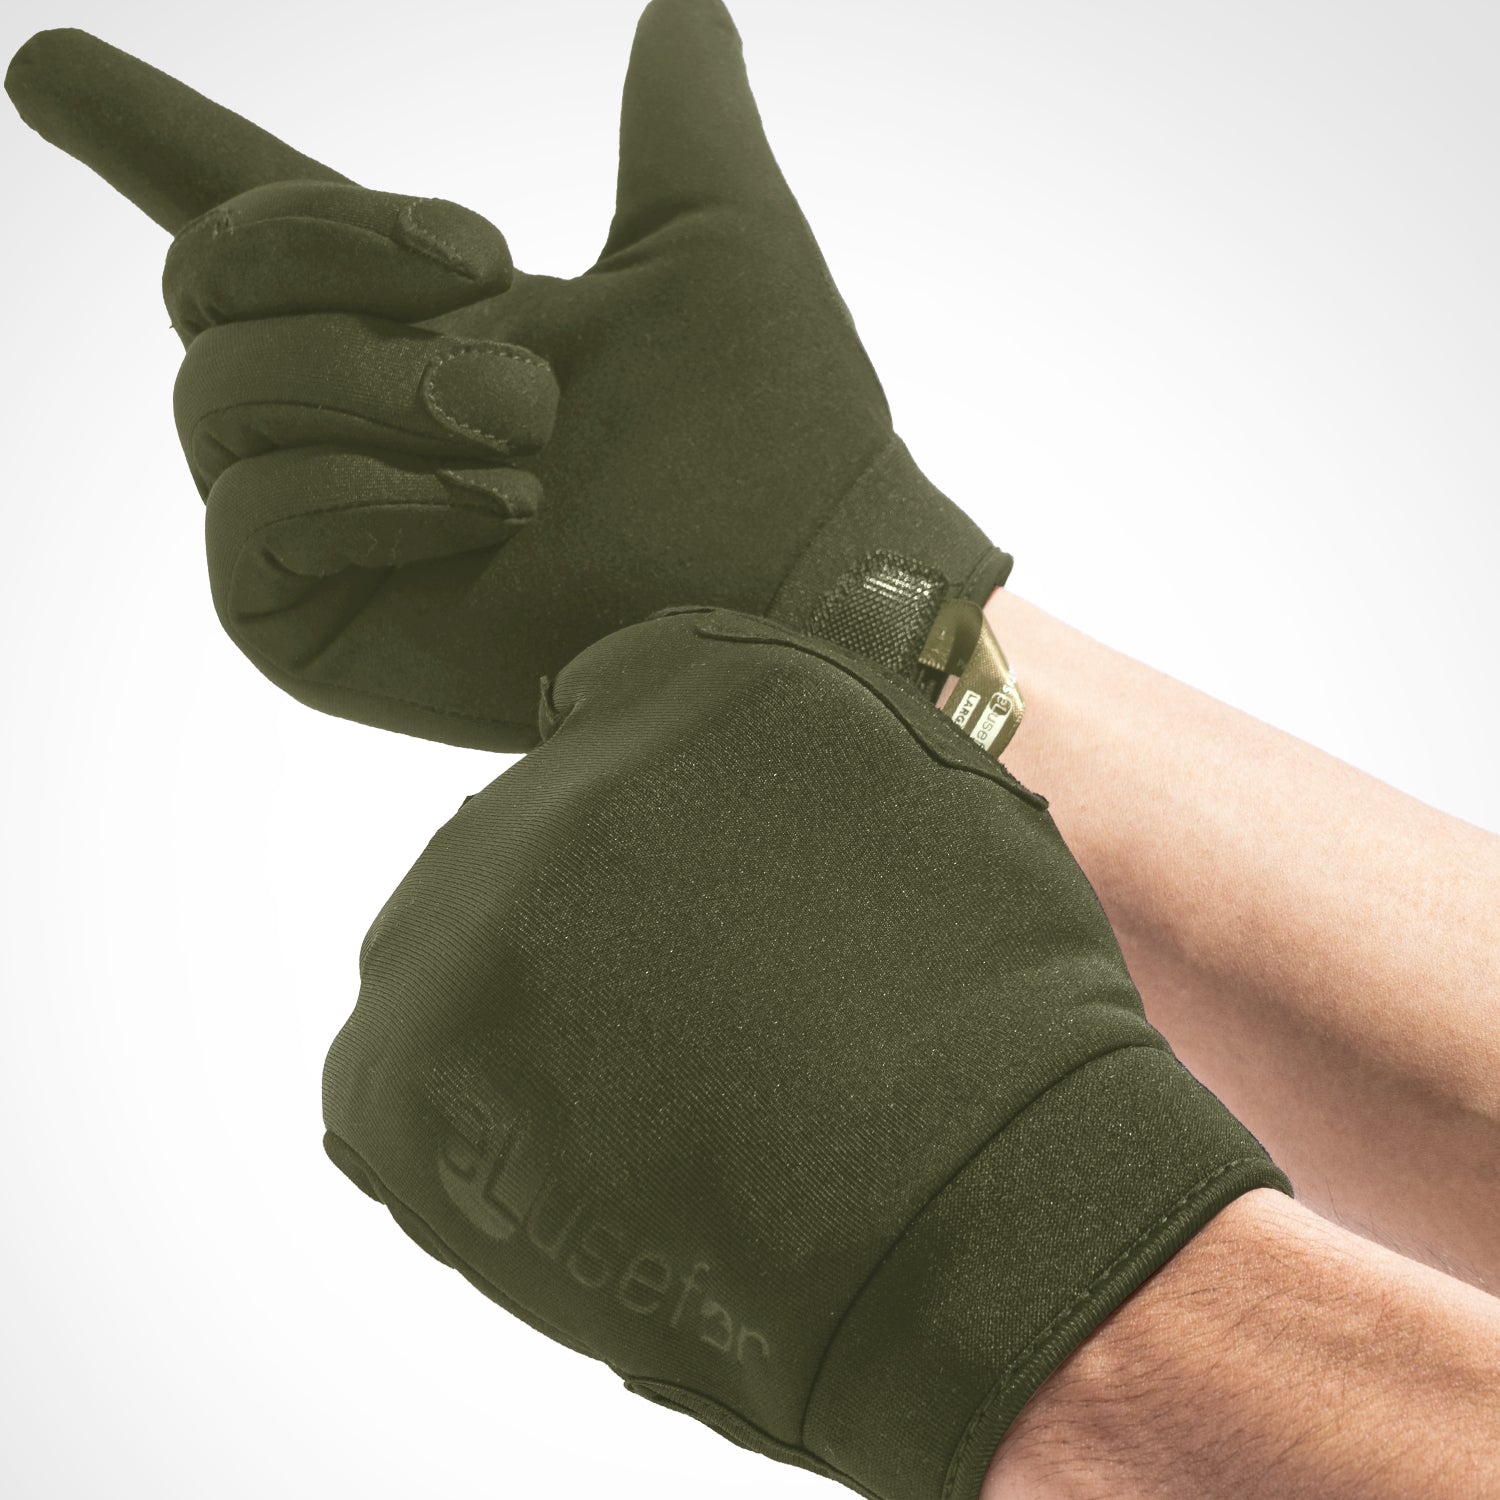 Captain Men's EDC Gloves, .8mm Durable Palm, 2Way Touch, Not for Badges, Army Green